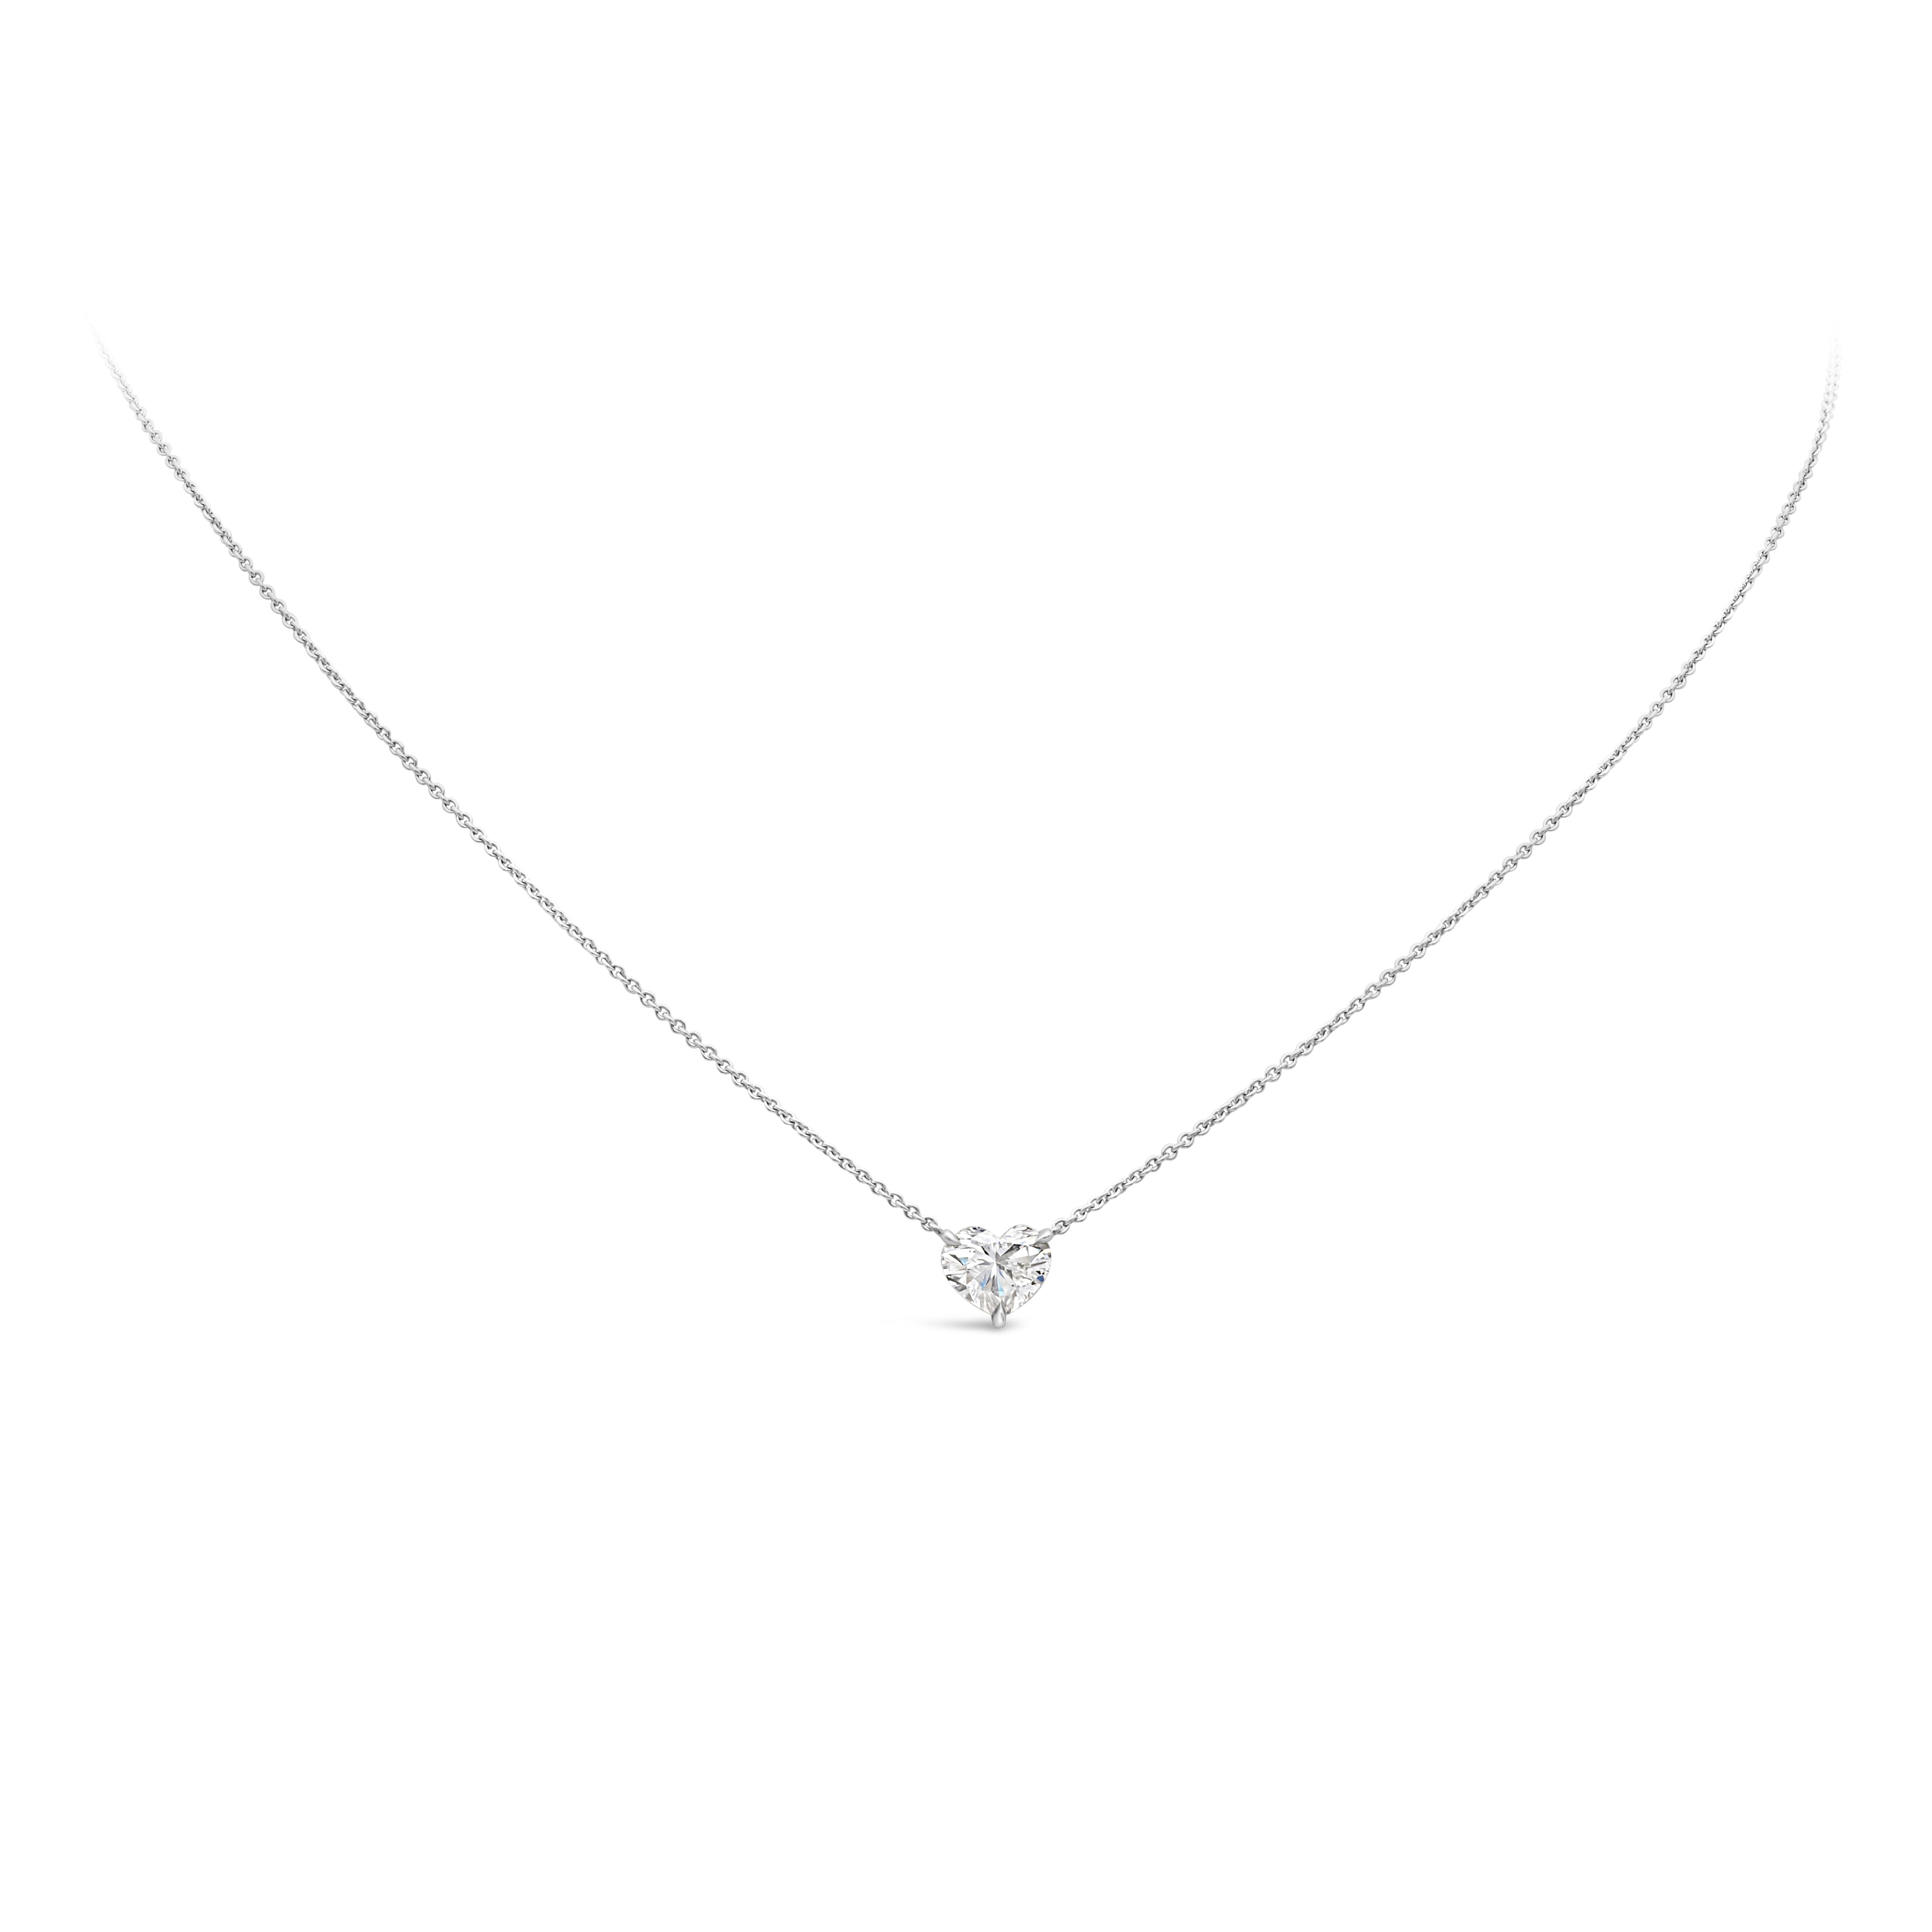 A classic pendant necklace showcasing a GIA Certified 1.18 Carats heart shape diamond, J color and SI2 in clarity. Set in a polished Platinum basket mounting. Suspended on an 16 inches adjustable 18K White Gold chain. Perfect for your everyday